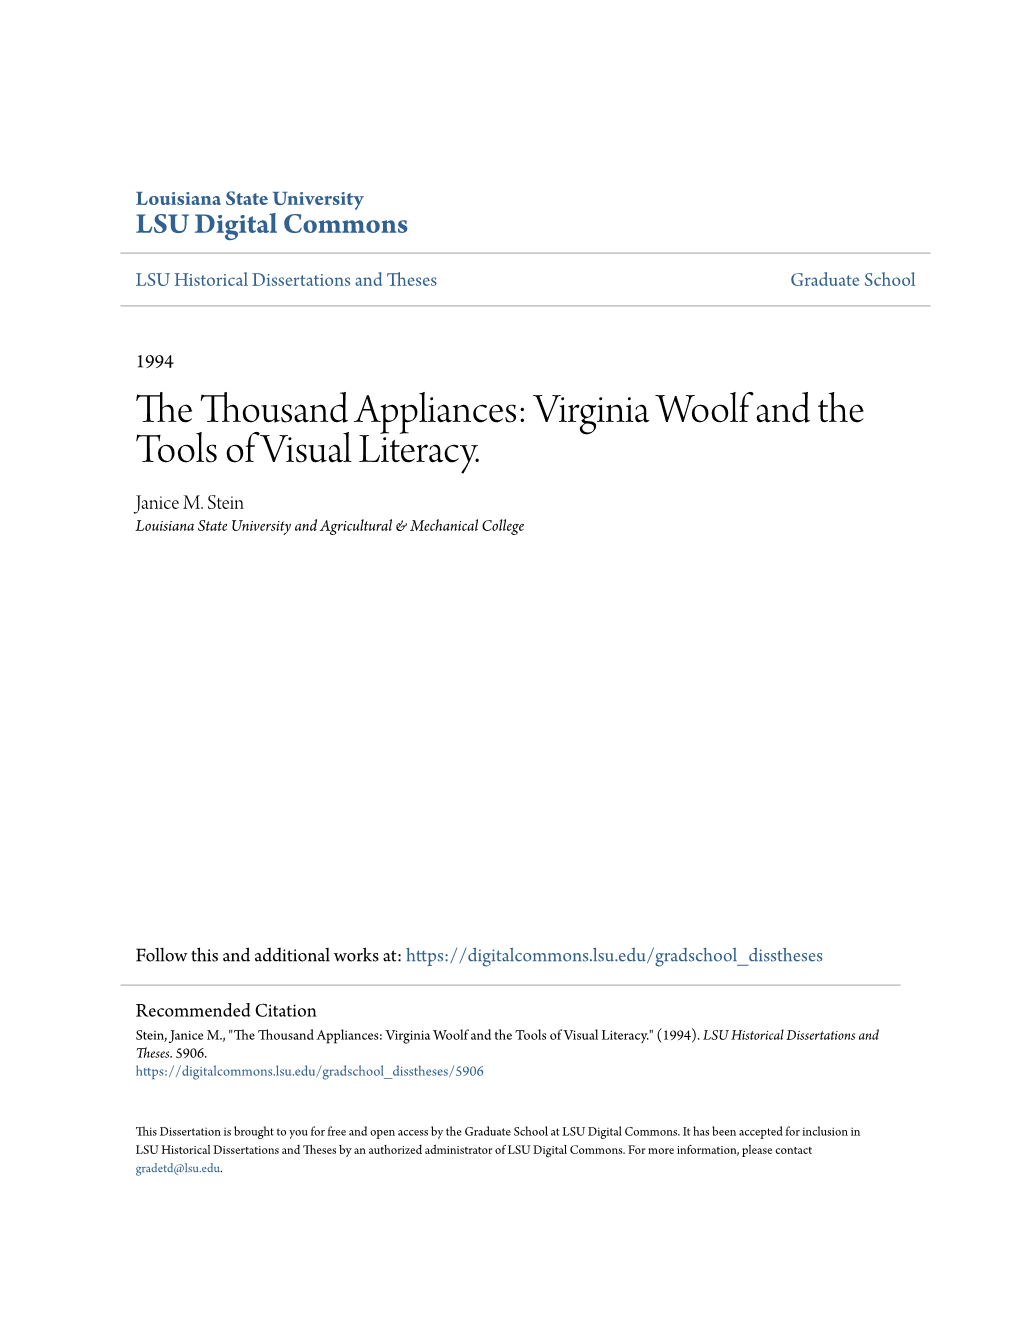 Virginia Woolf and the Tools of Visual Literacy. Janice M